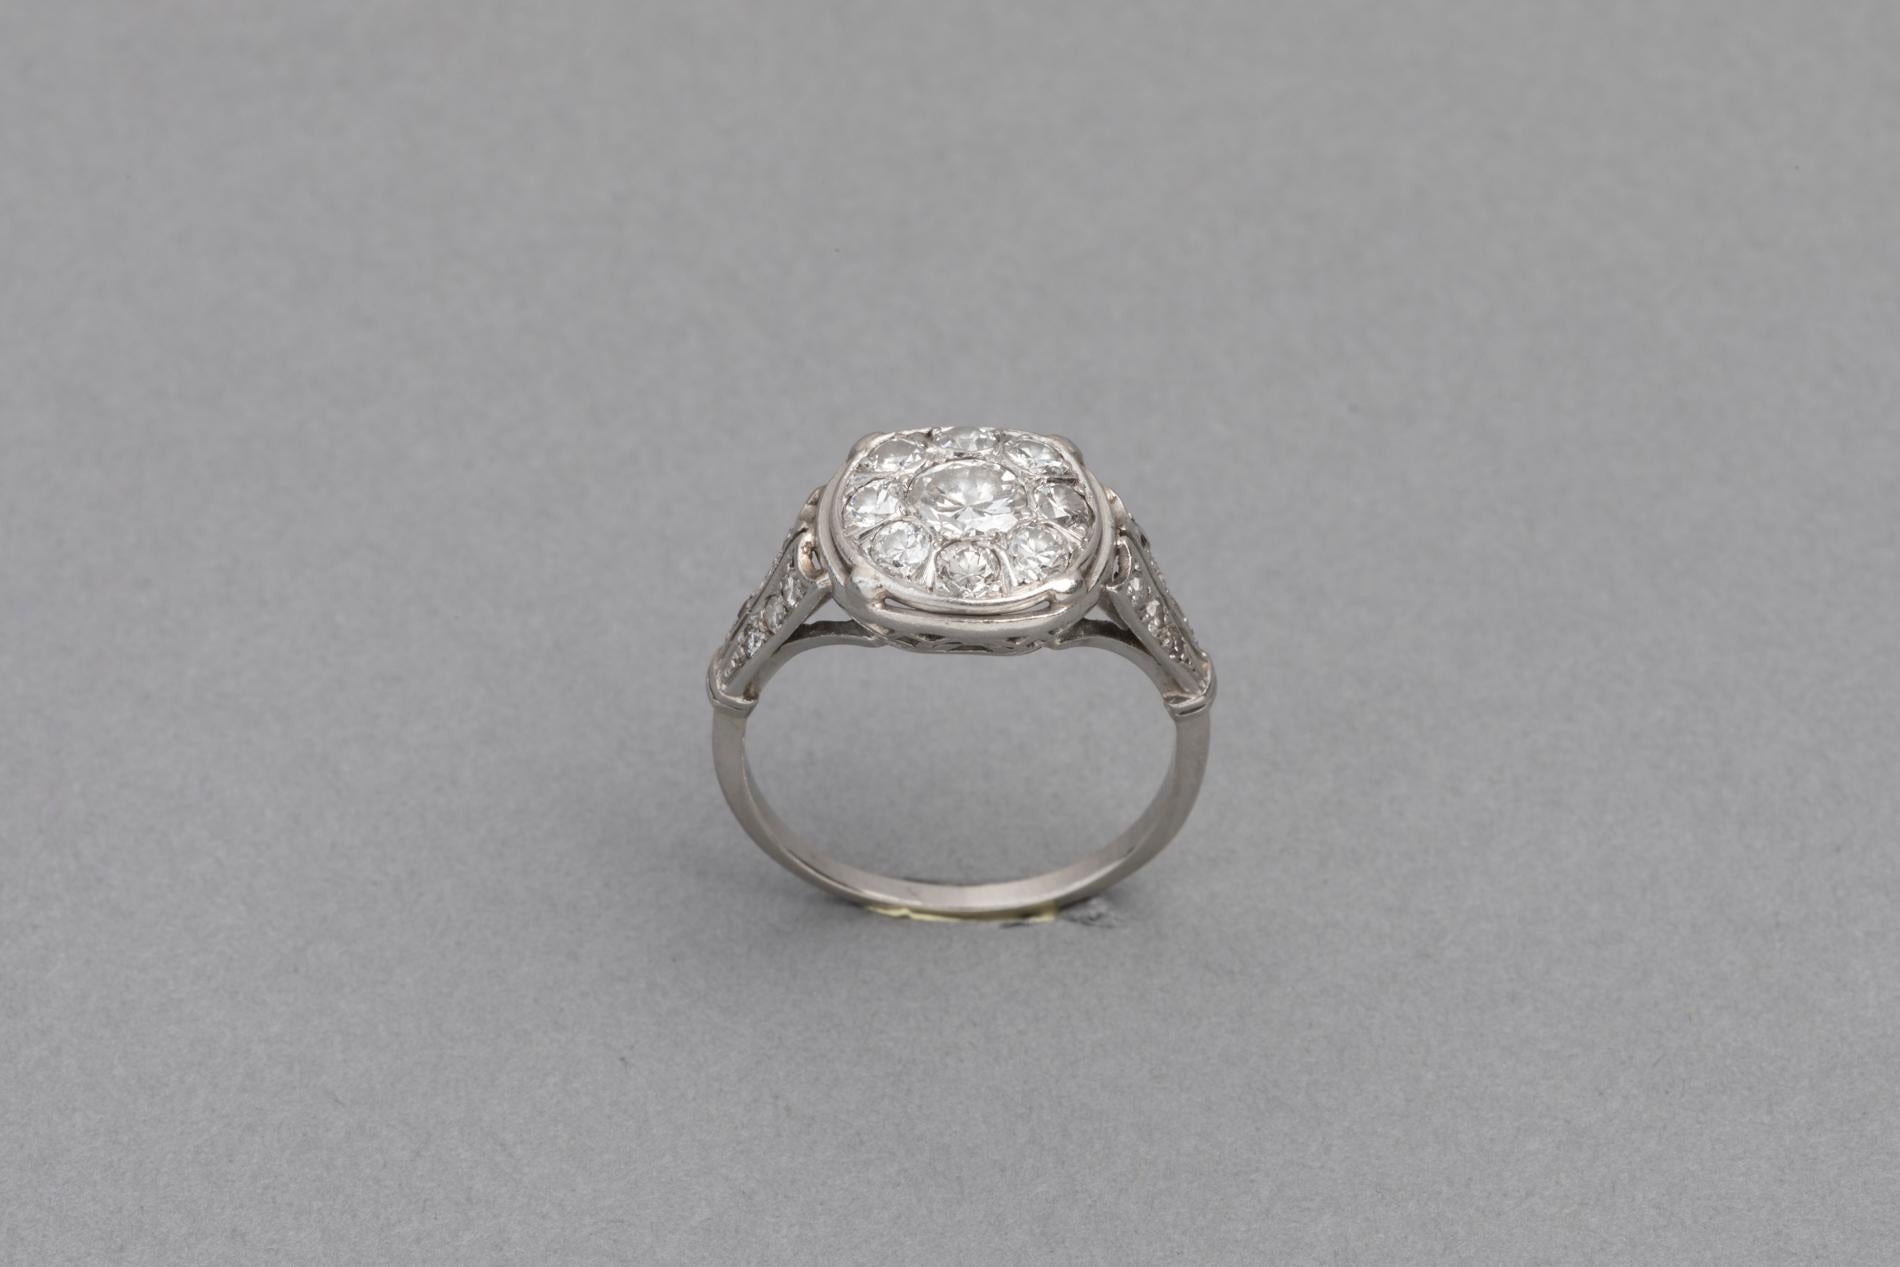 Lovely designed  antique ring, made in France circa 1920. 

The Diamonds are white and clear. They shine very well.

Mounted with platinum and good quality old European cut diamonds. French official marks for Platinum (The old man).

The central